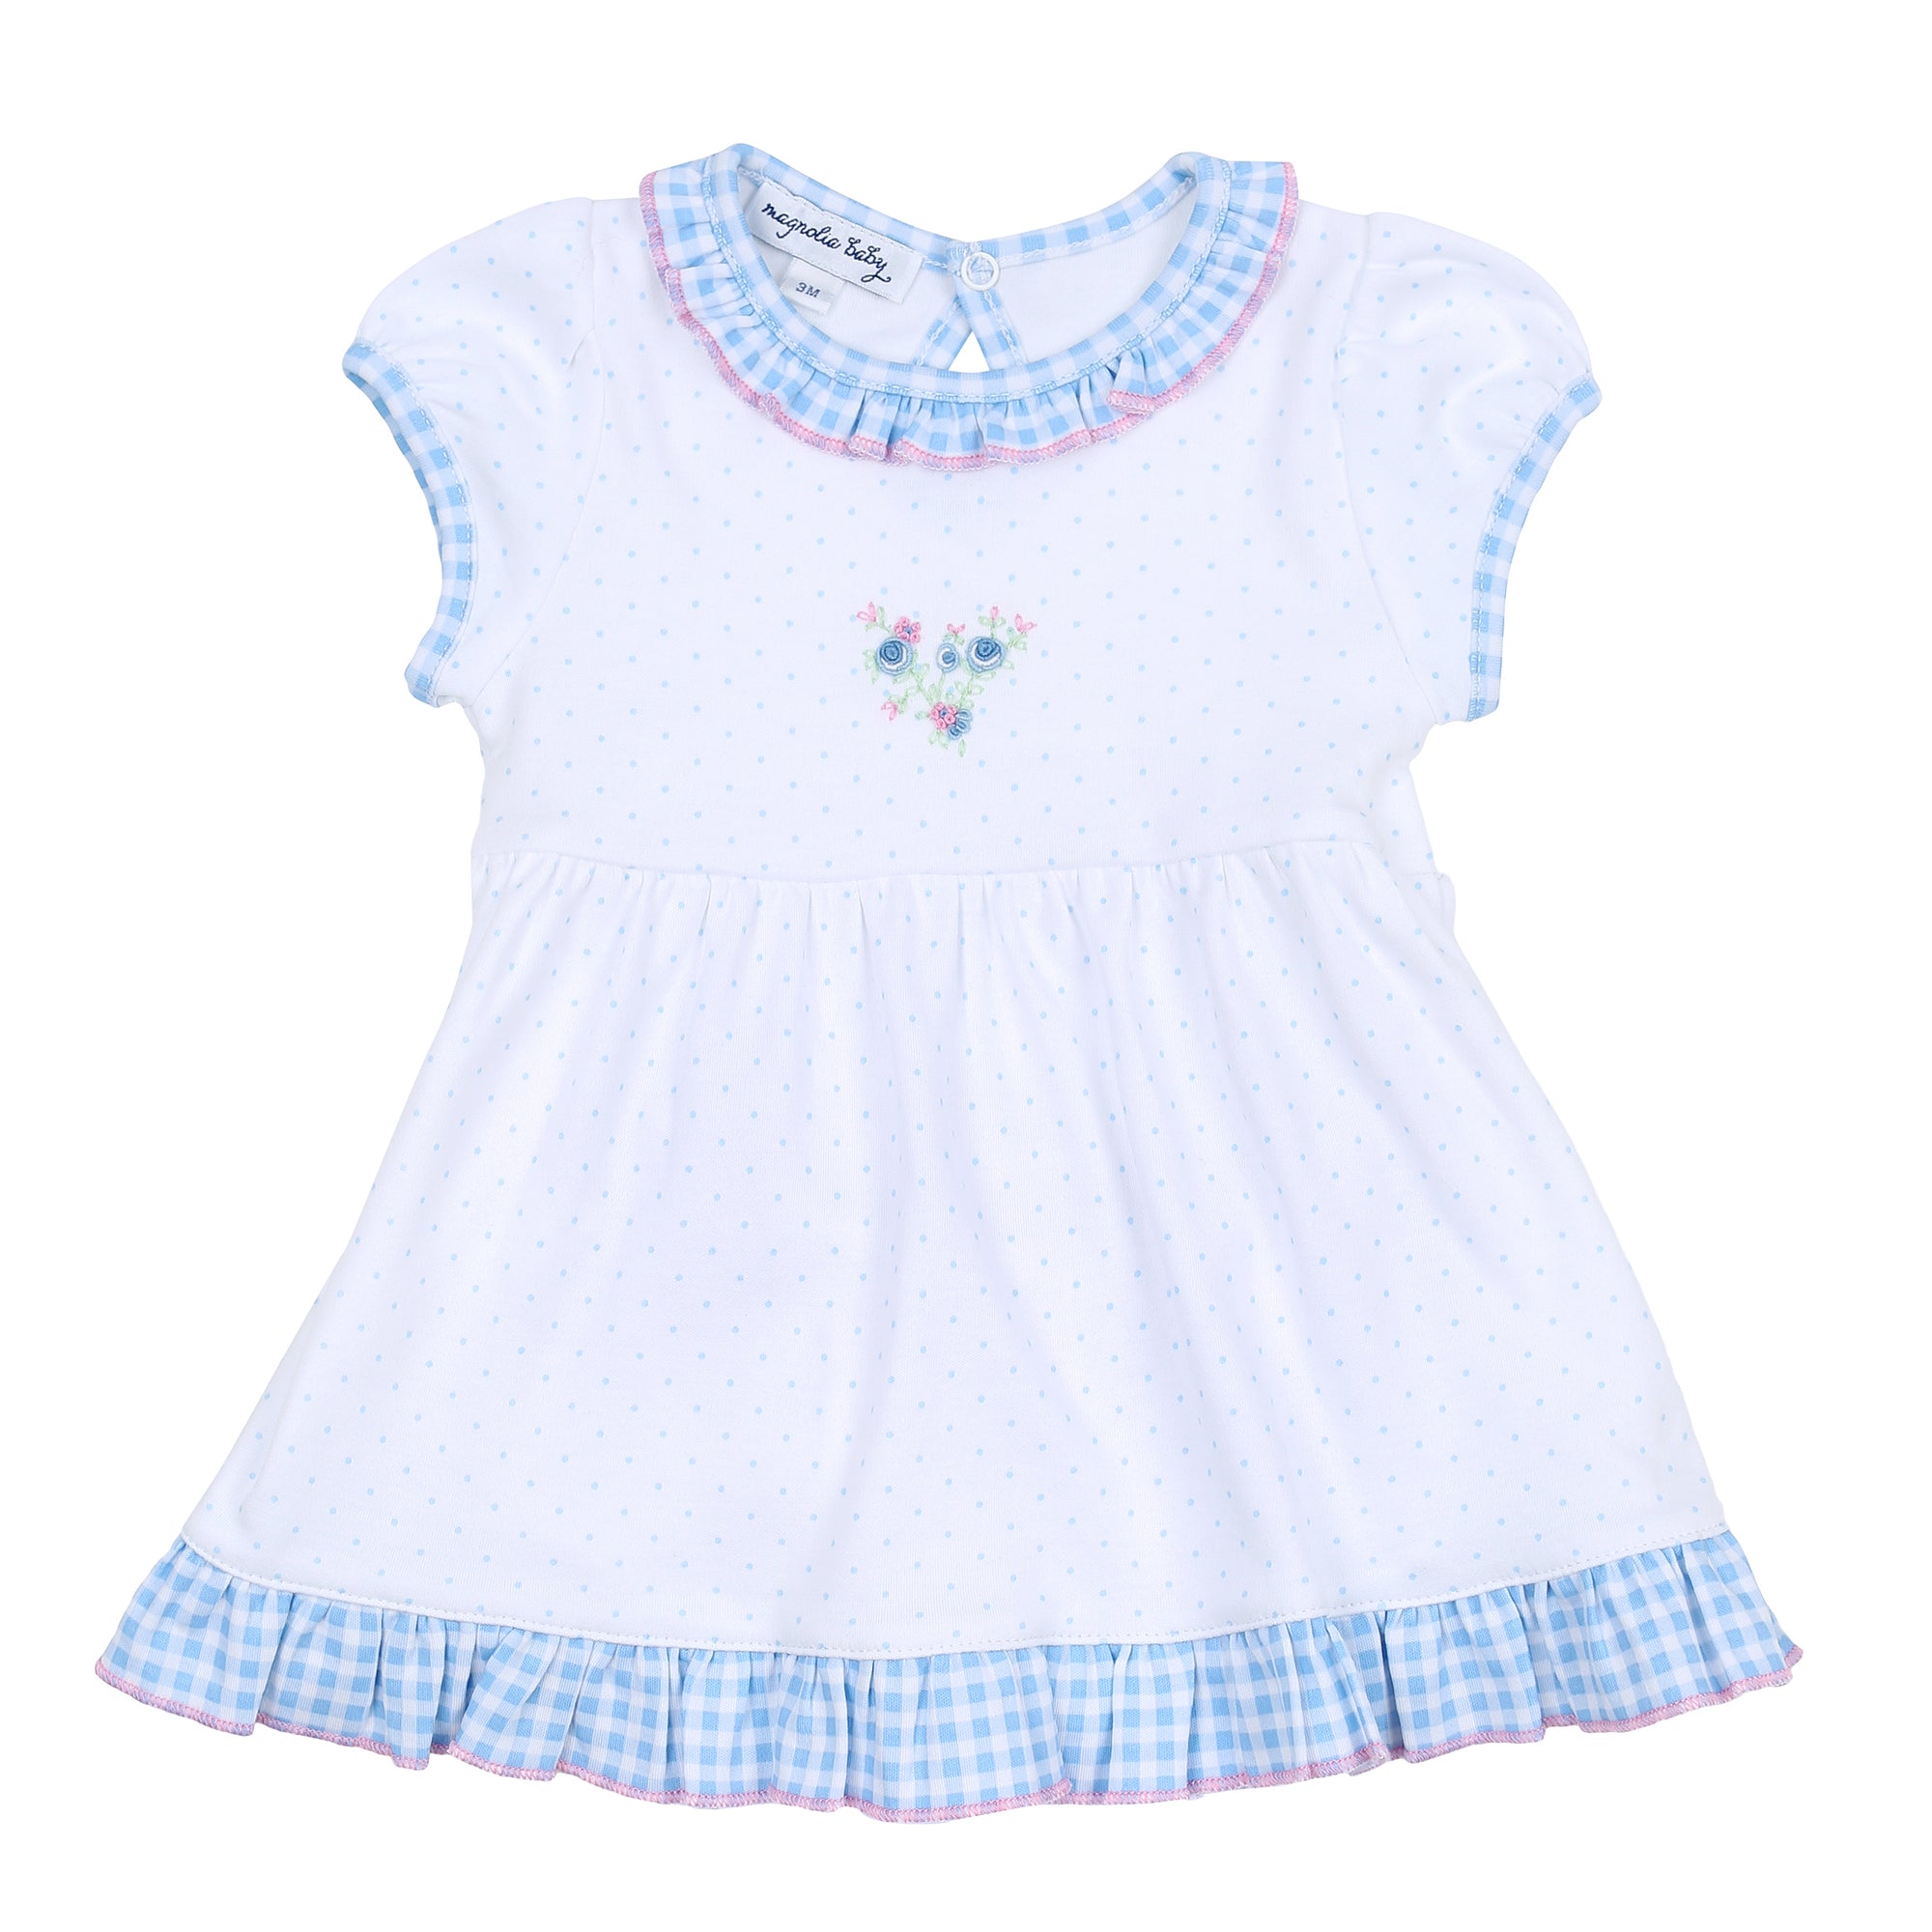 Anna's Classics Embroidered Short Sleeve Toddler Dress